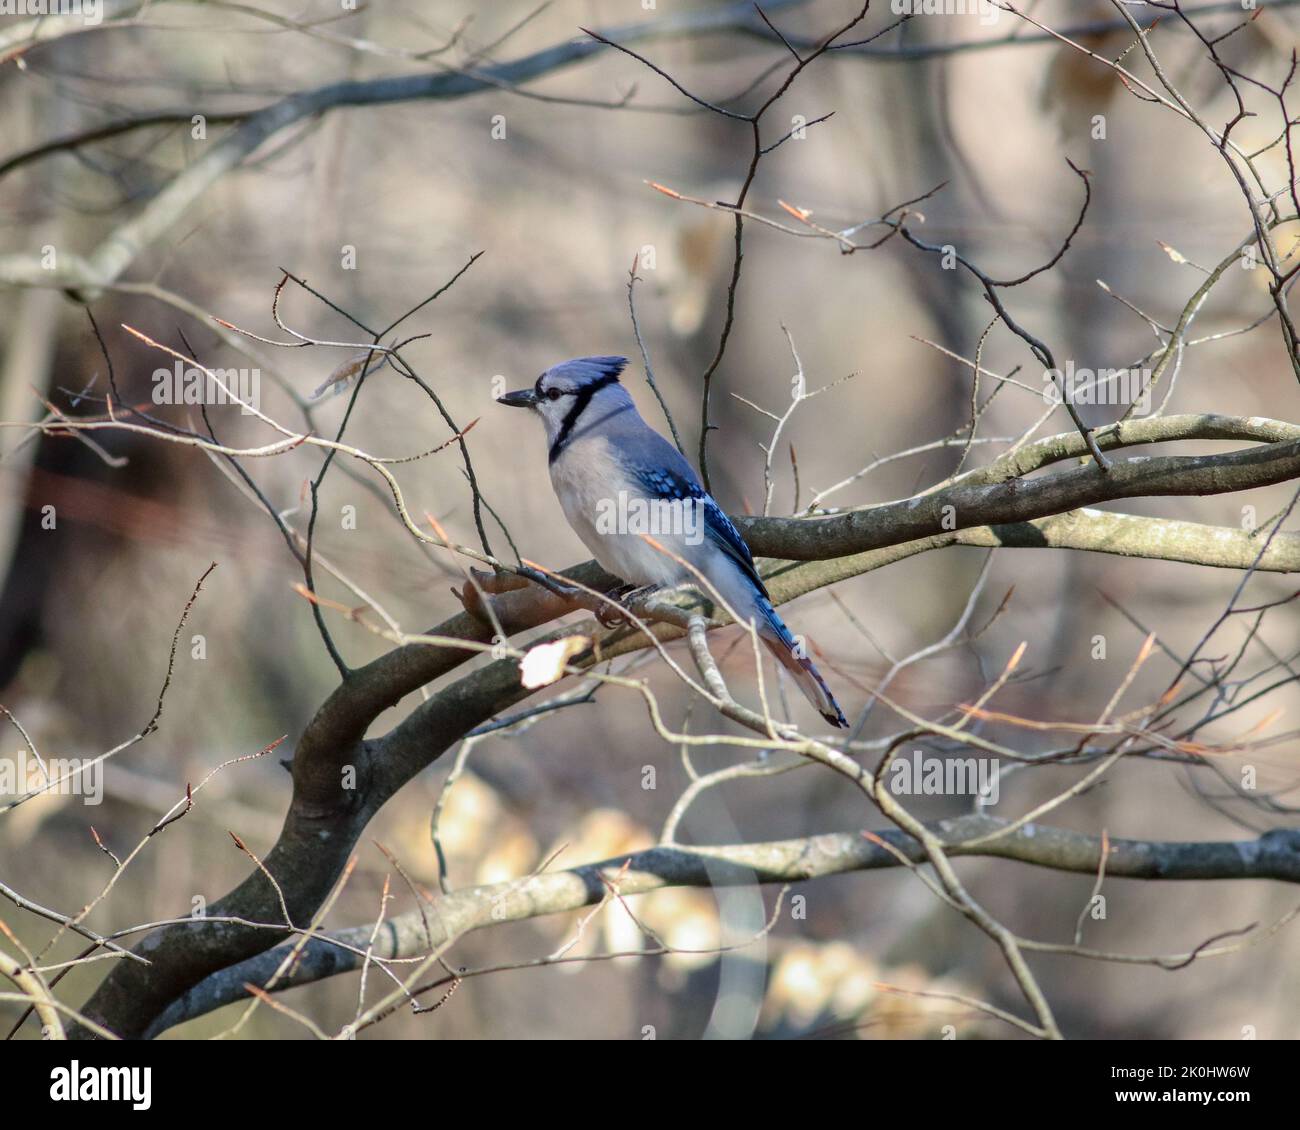 A Blue jay bird perched on a branch against blurred background Stock Photo